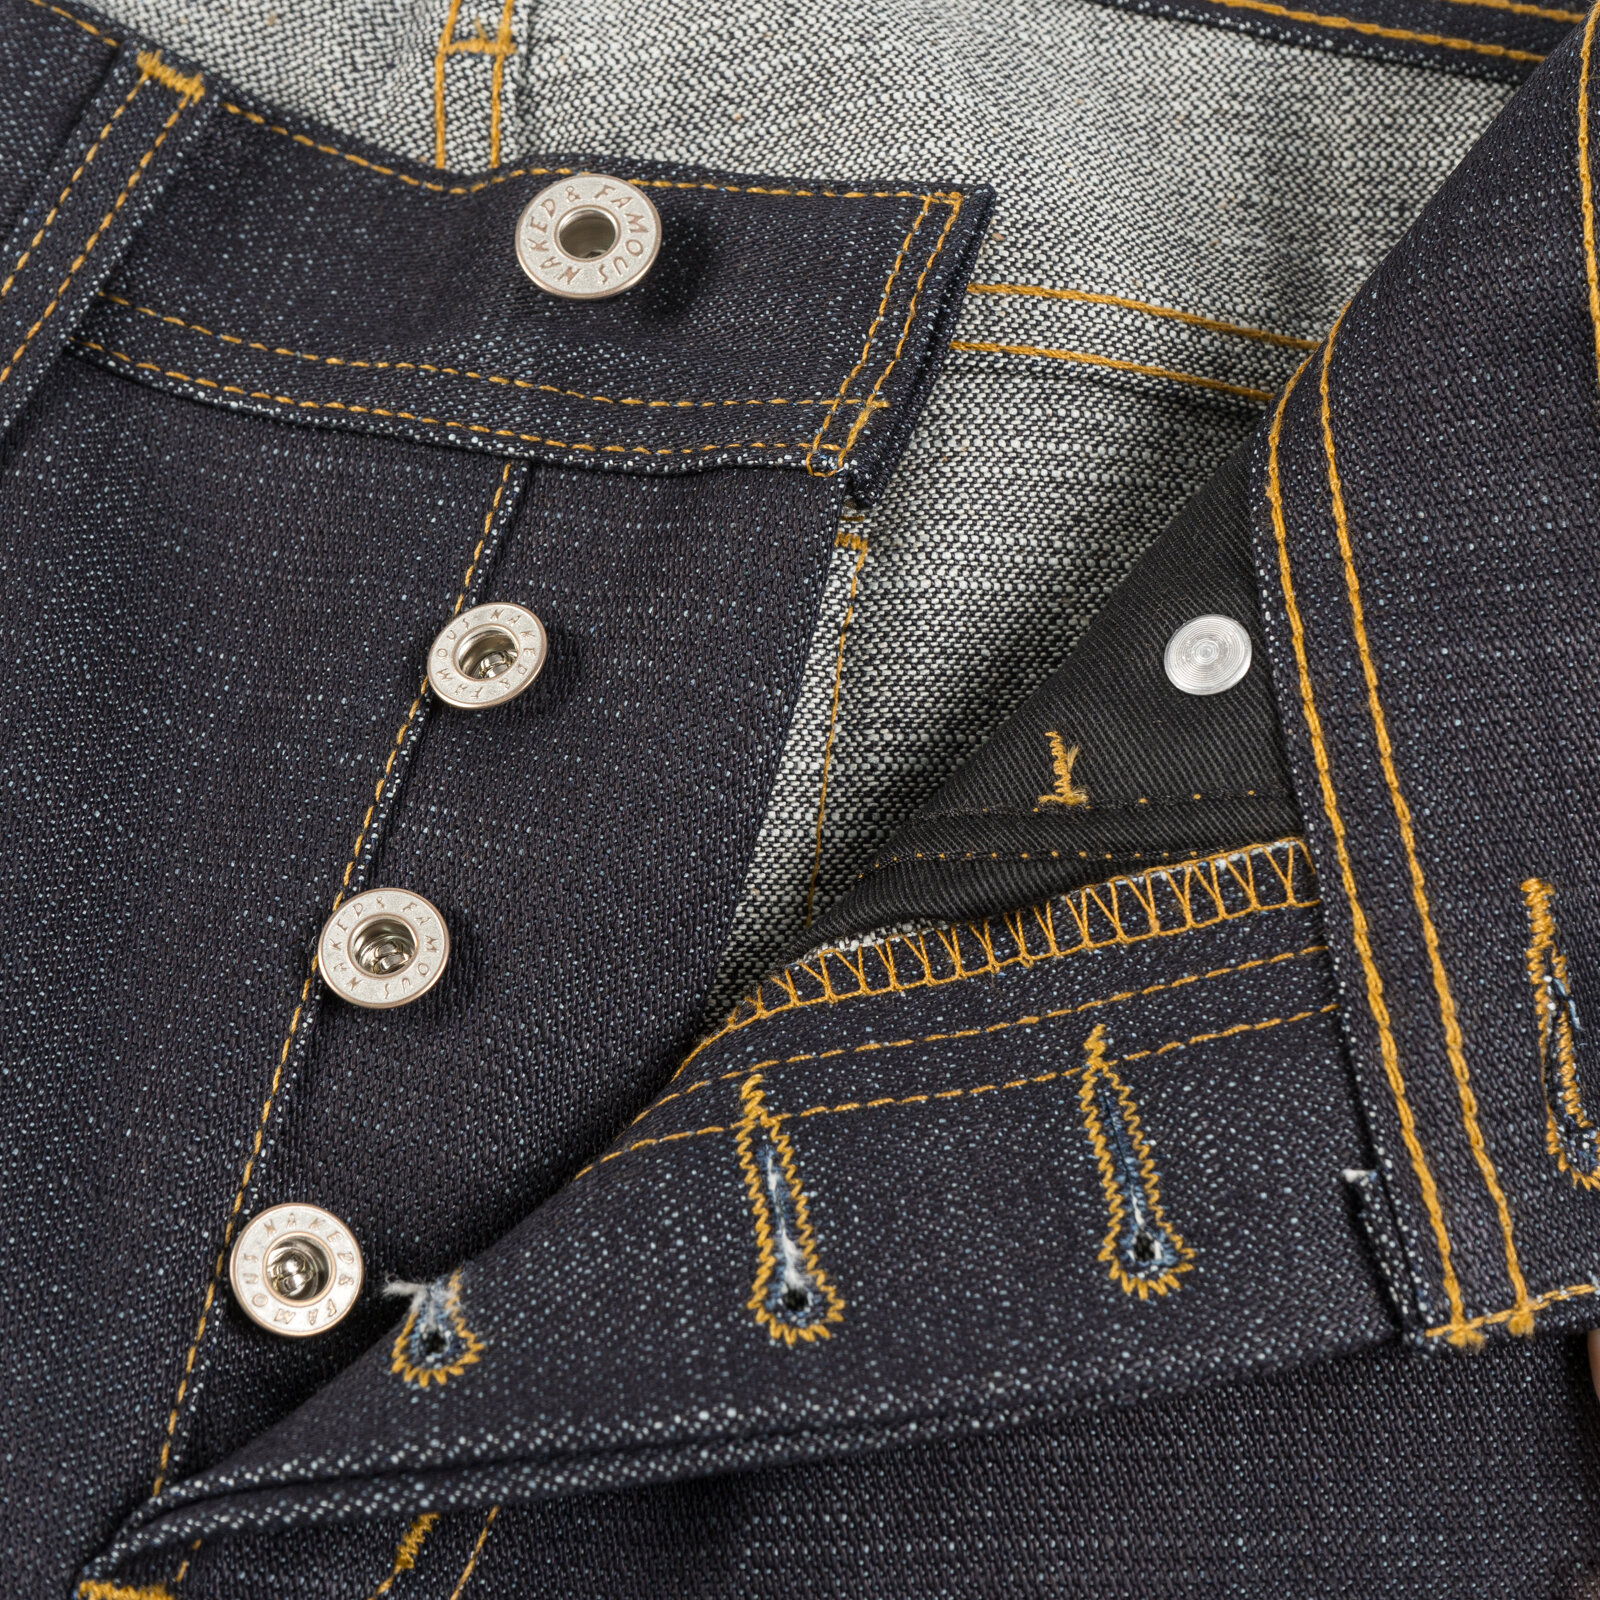  Empire State Selvedge jeans - button fly 